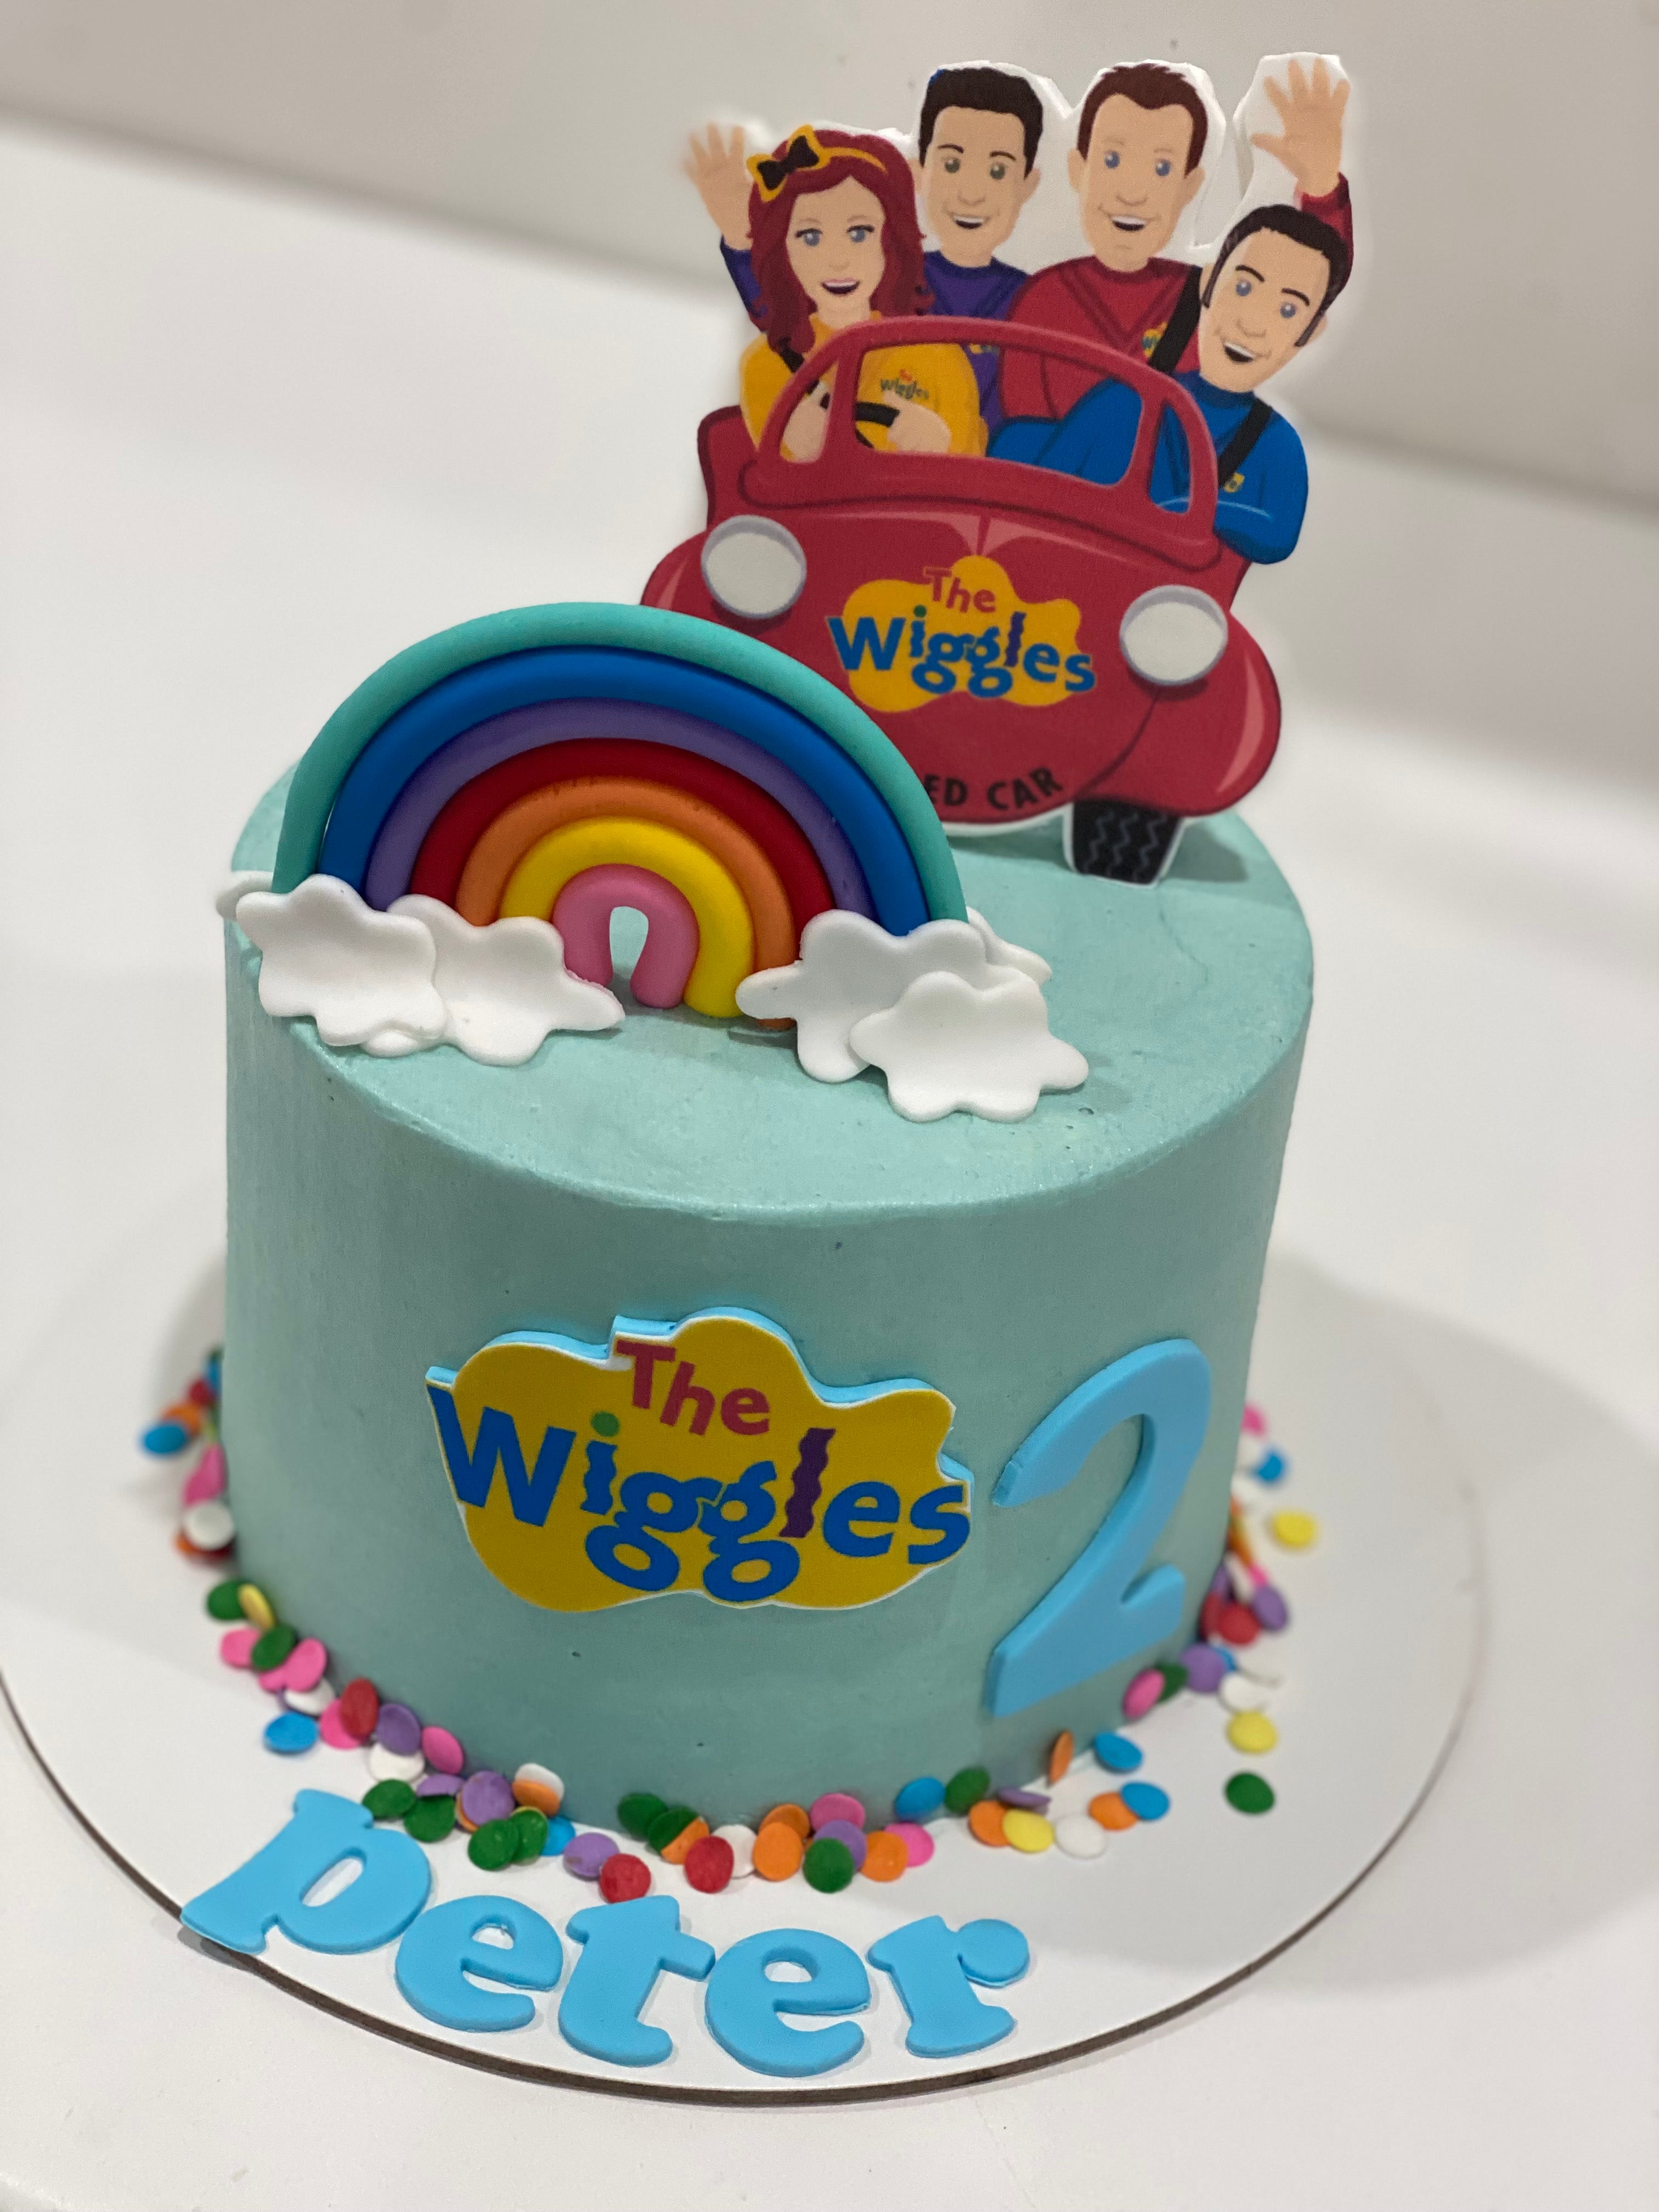 6" Wiggles Red car 2D